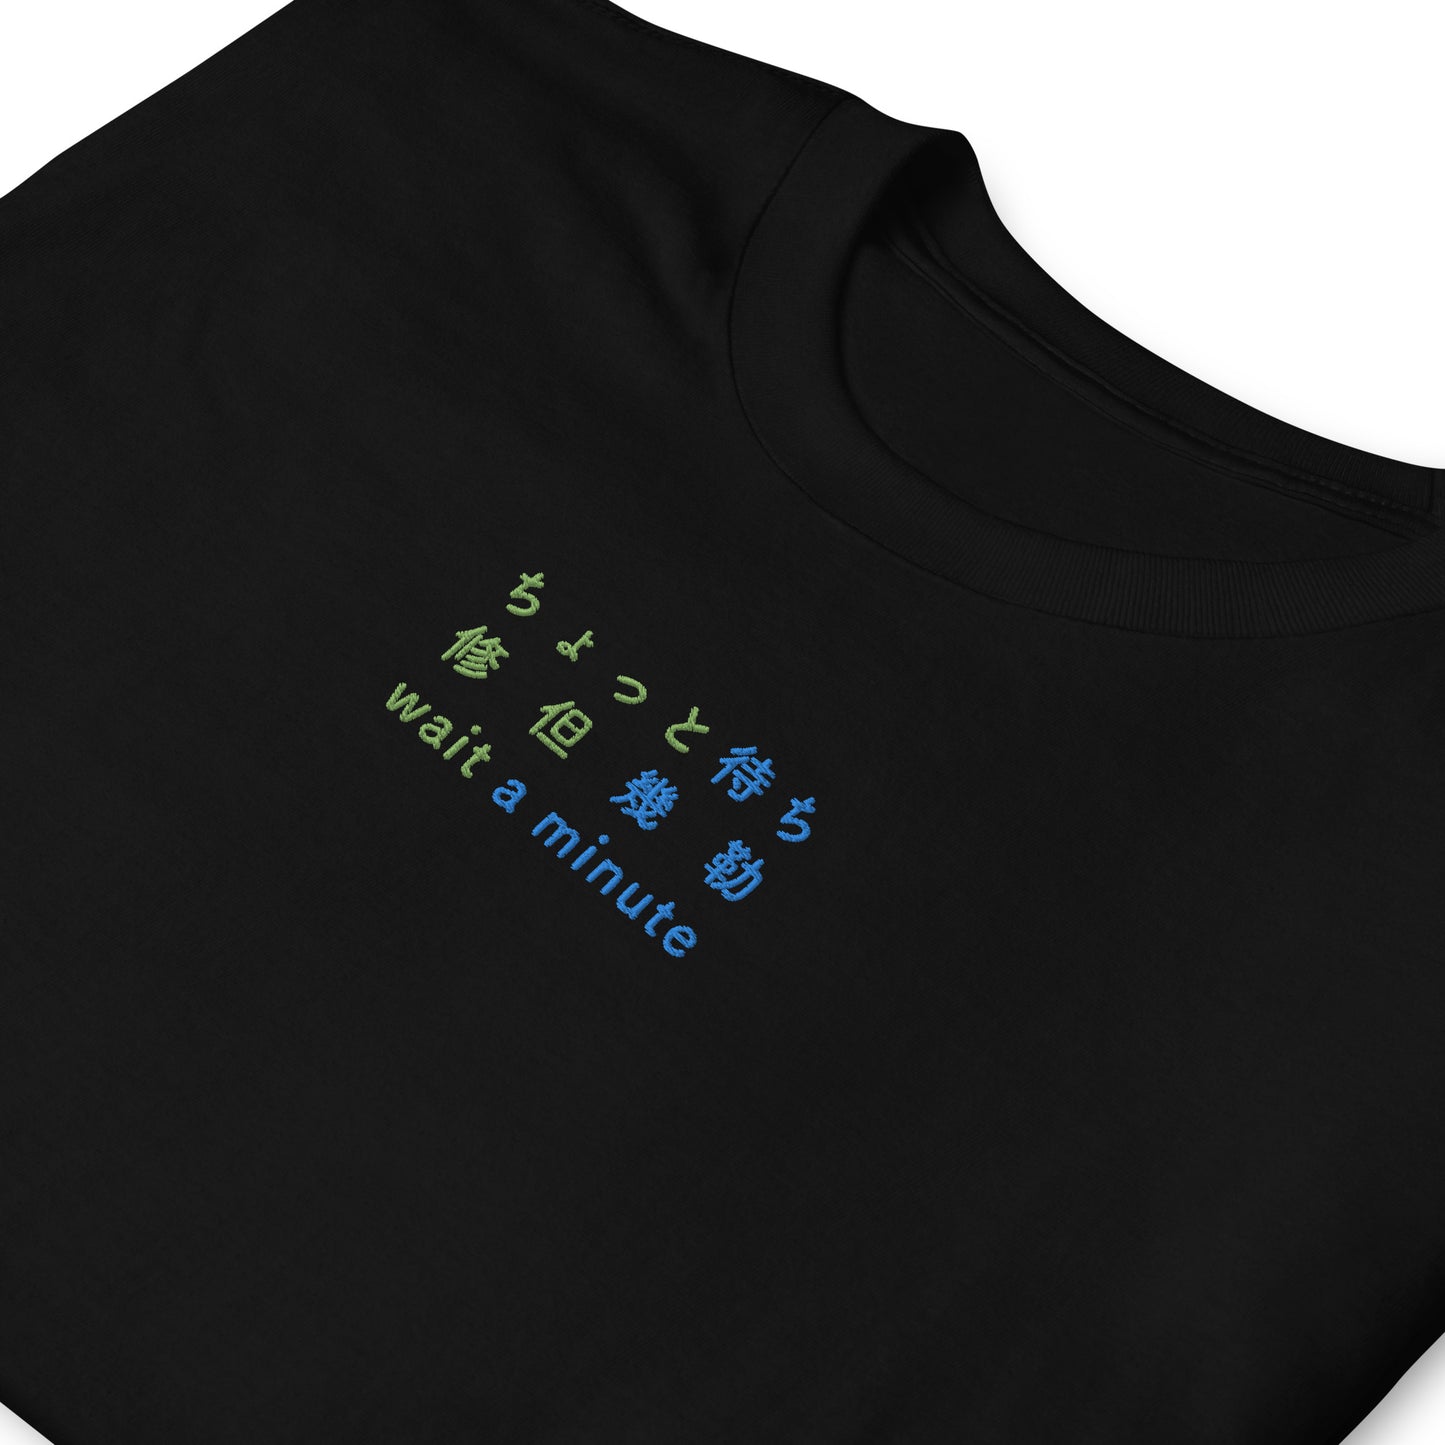 Black High Quality Tee - Front Design with an Green, Blue Embroidery "Wait A Minute" in Japanese,Chinese and English  Edit alt text